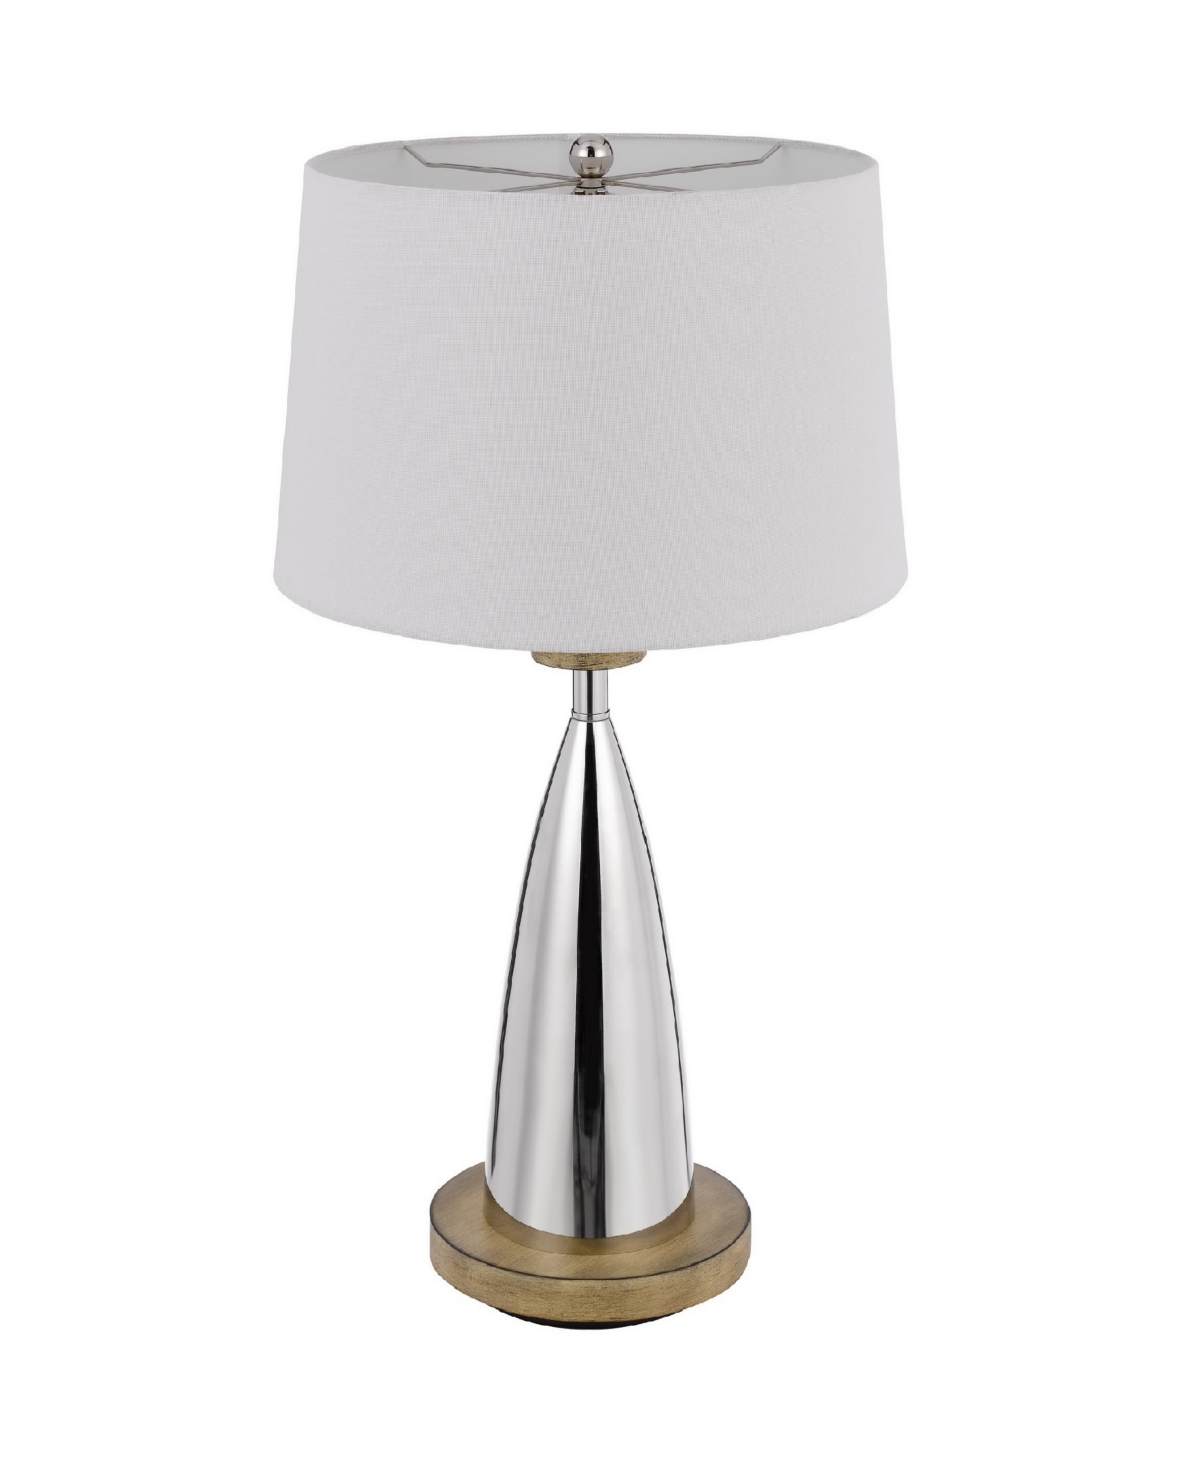 Shop Cal Lighting 31" Height Metal Table Lamp With Wood Accents In Chrome,wood